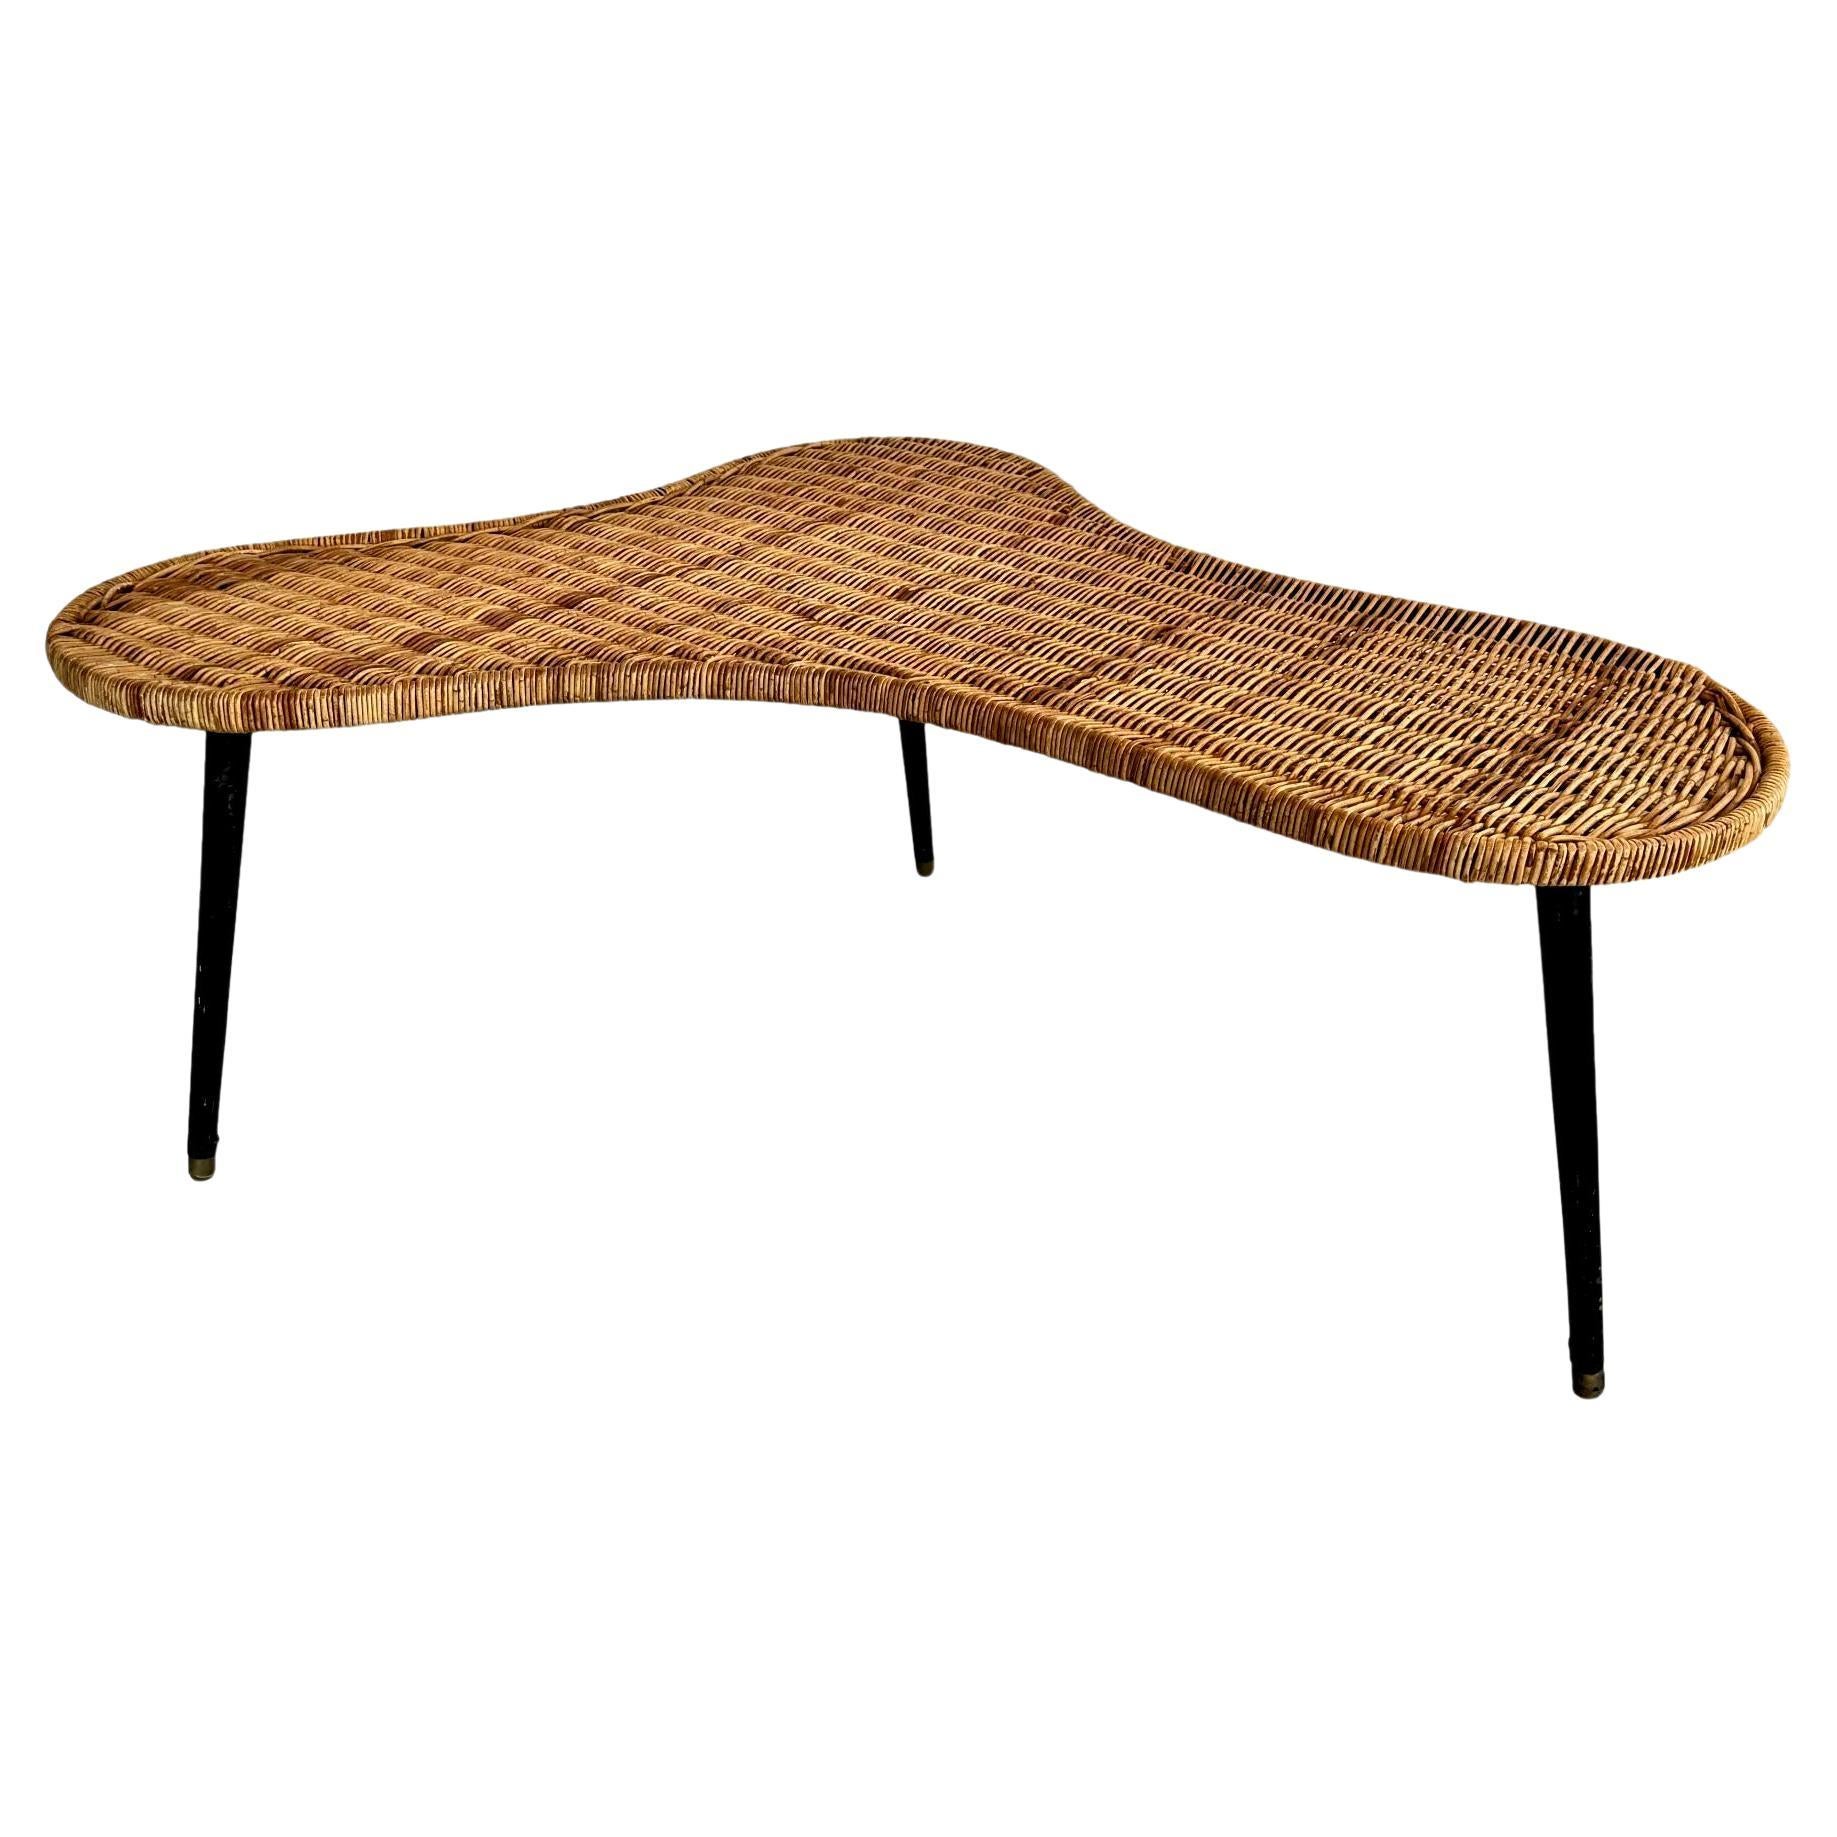 Biomorphic Wicker and Iron Coffee Table, 1950s France For Sale